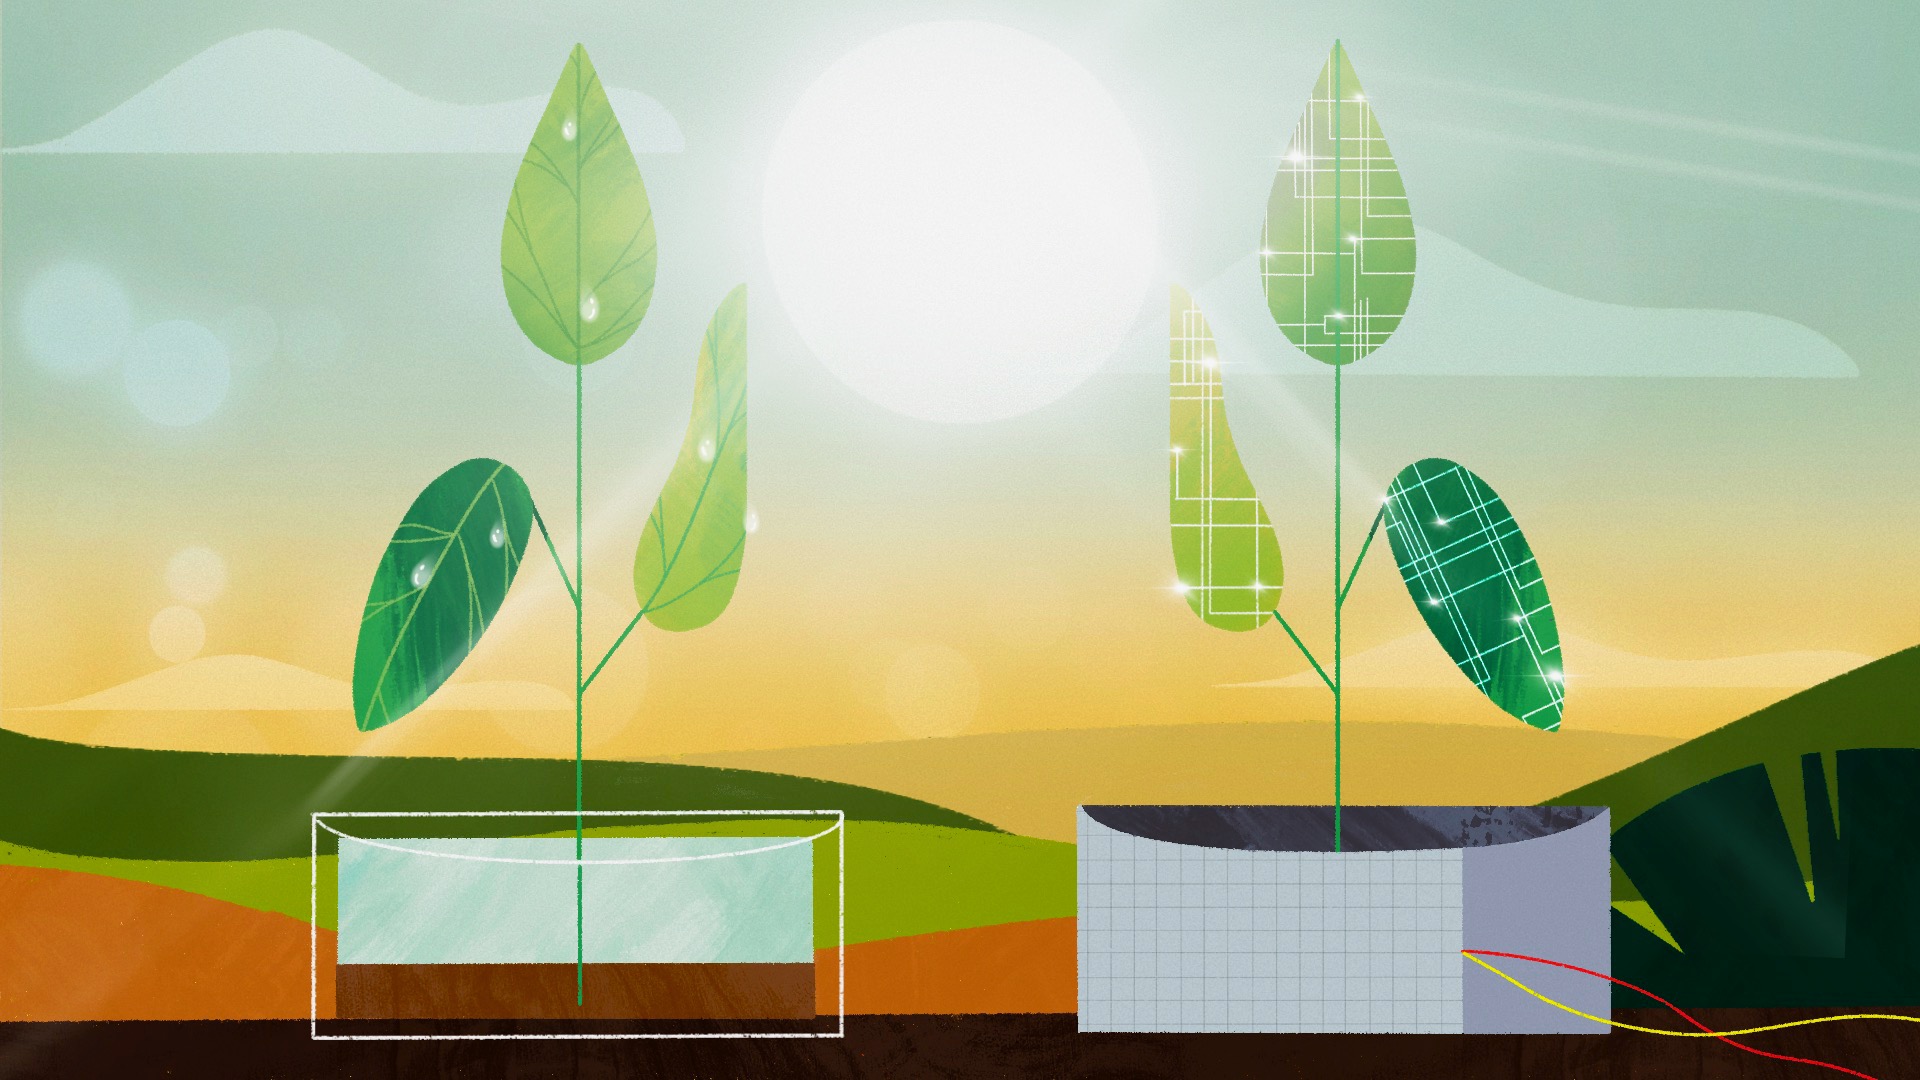 Illustration depicting two plants in the sunlight. One of the plants is bionic and has attached cords.